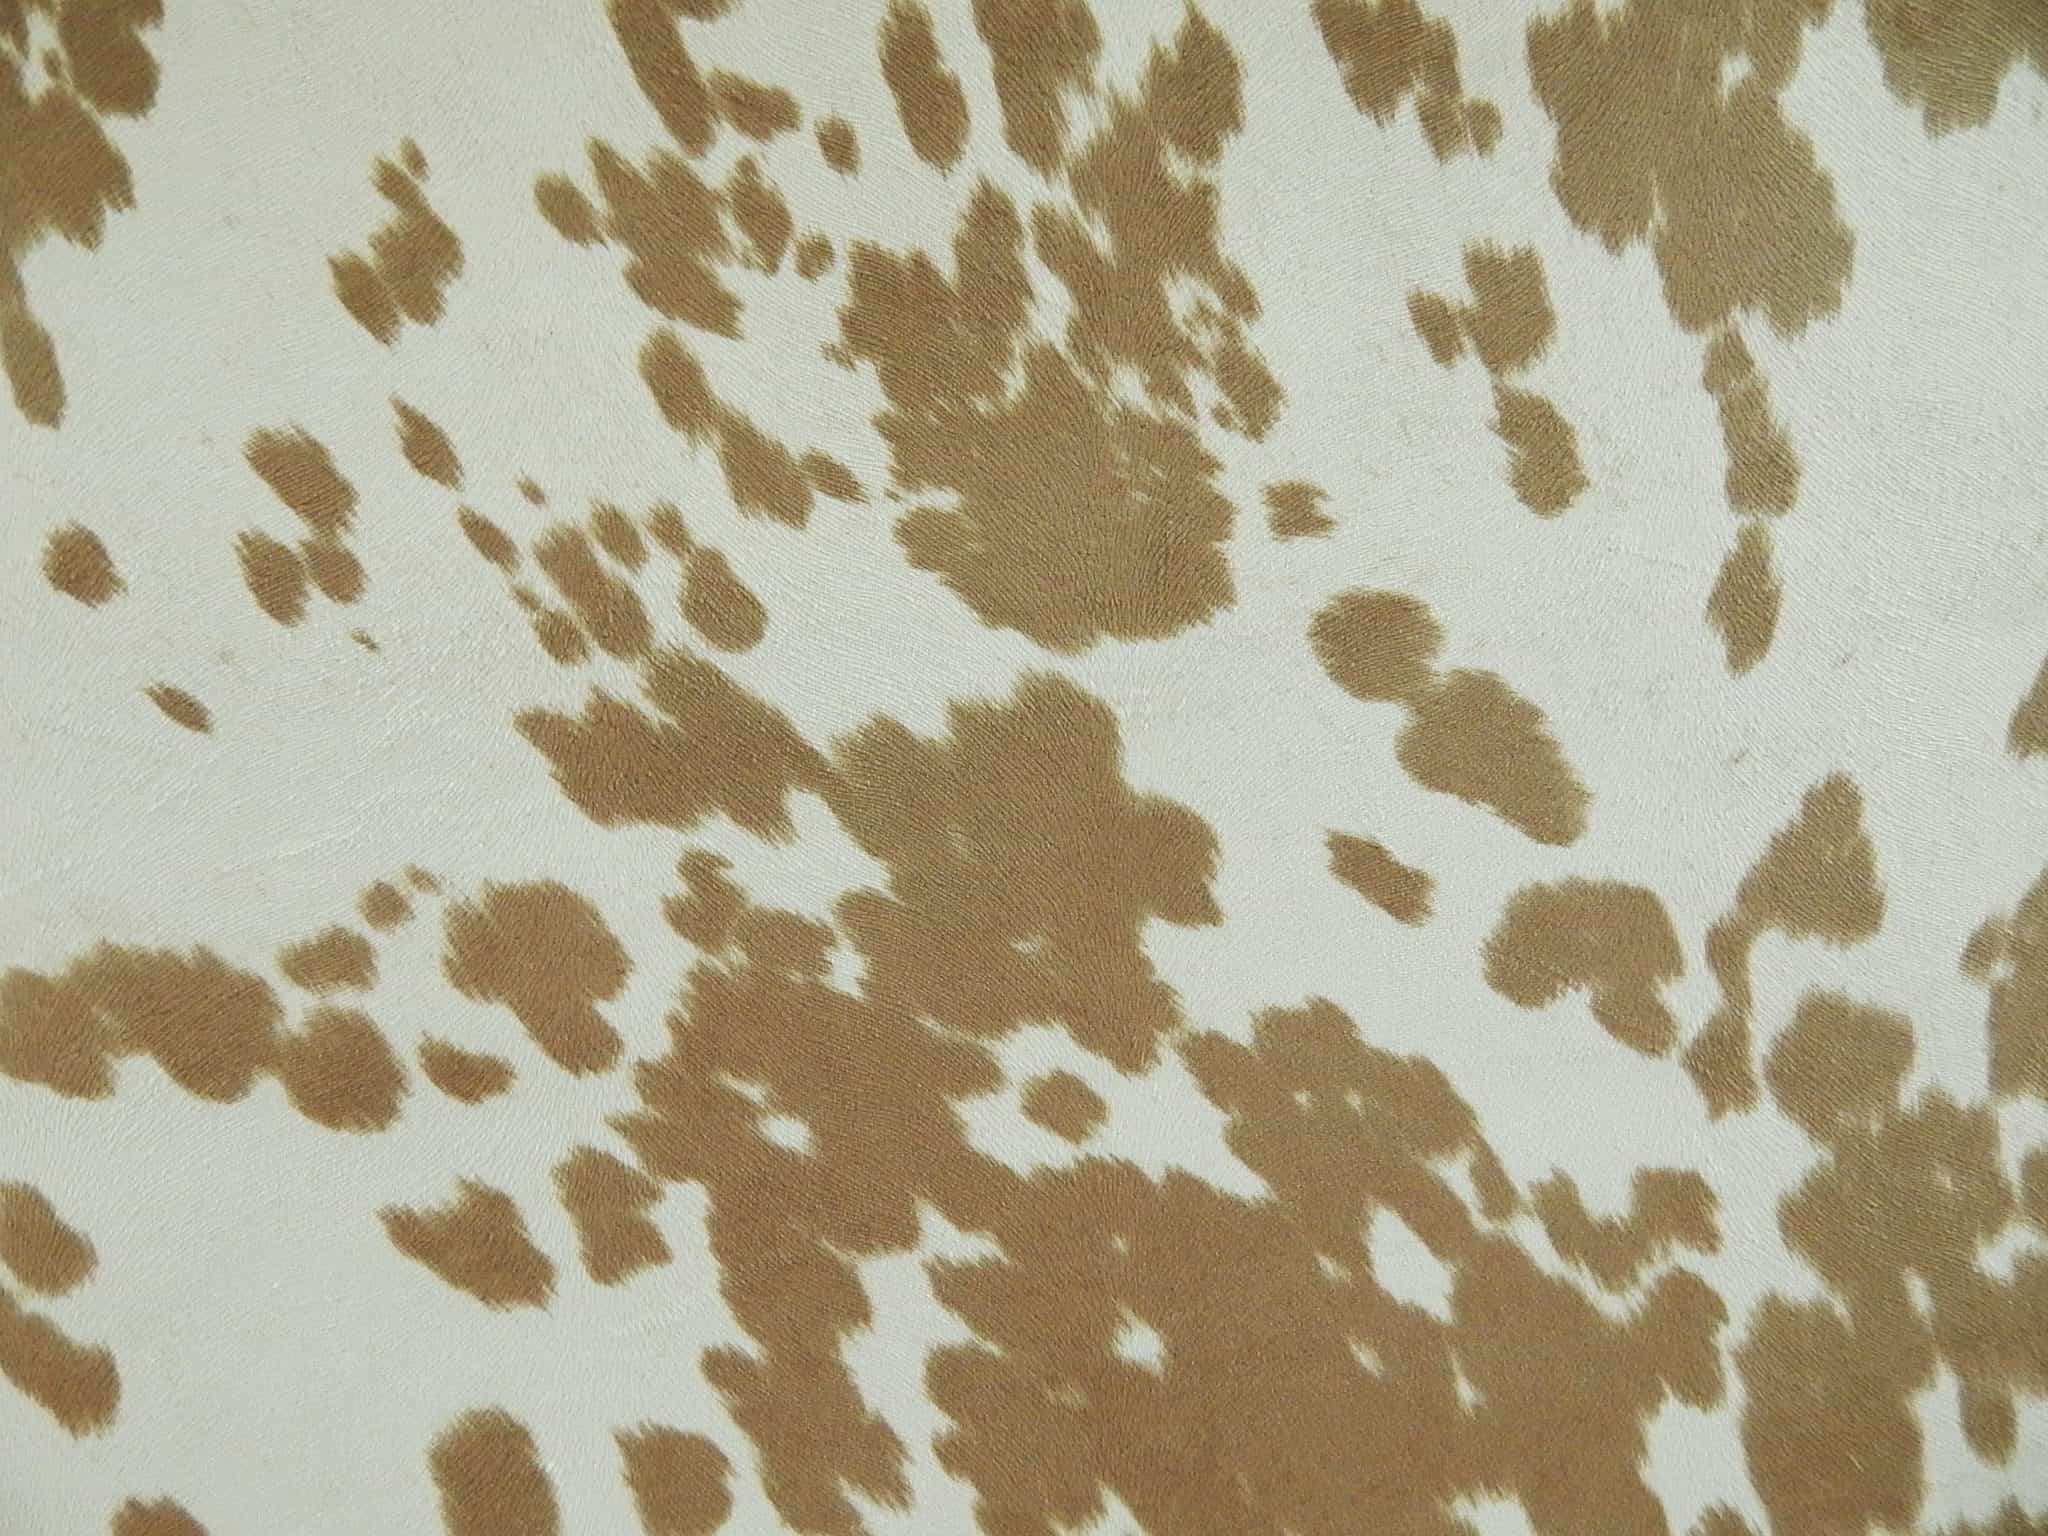 Suede Velvet Cow Print Fabric Udder Madness Upholstery 58 Wide